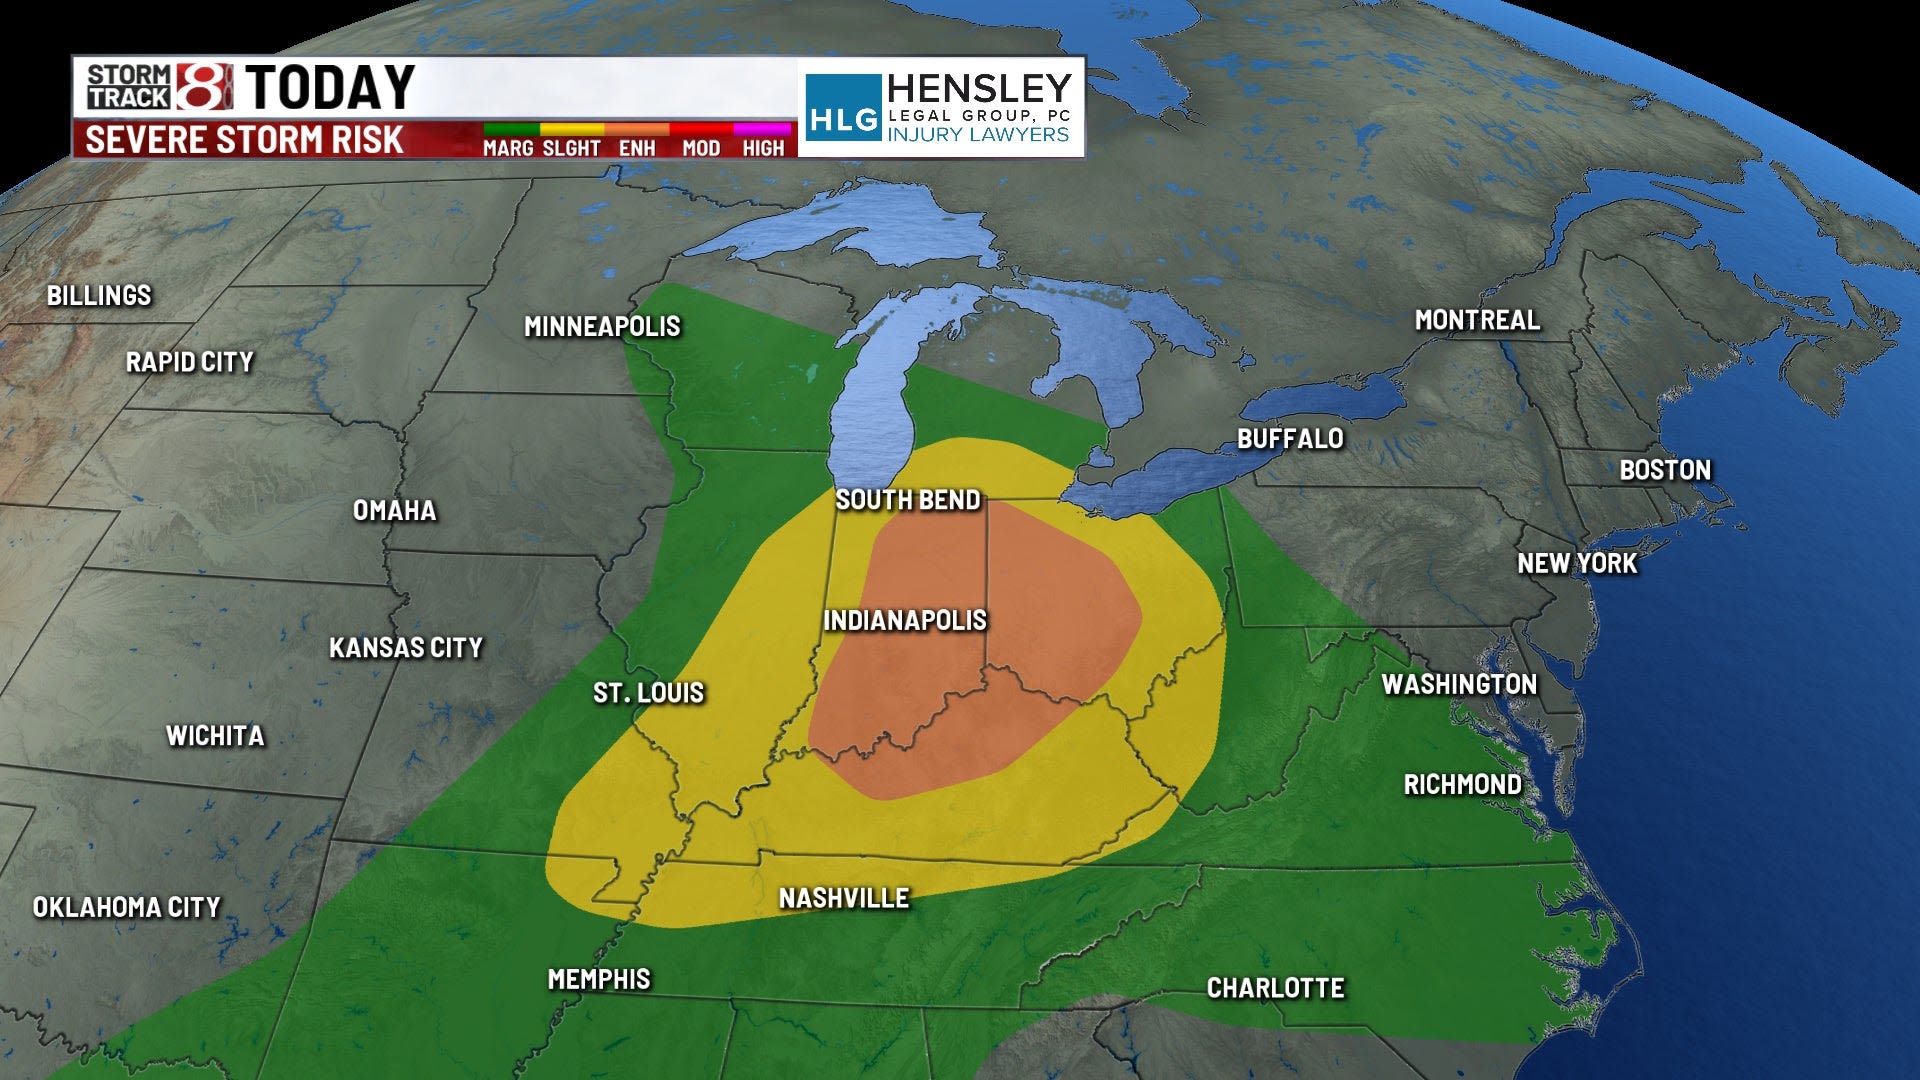 How common are enhanced risks of severe weather in Indiana?